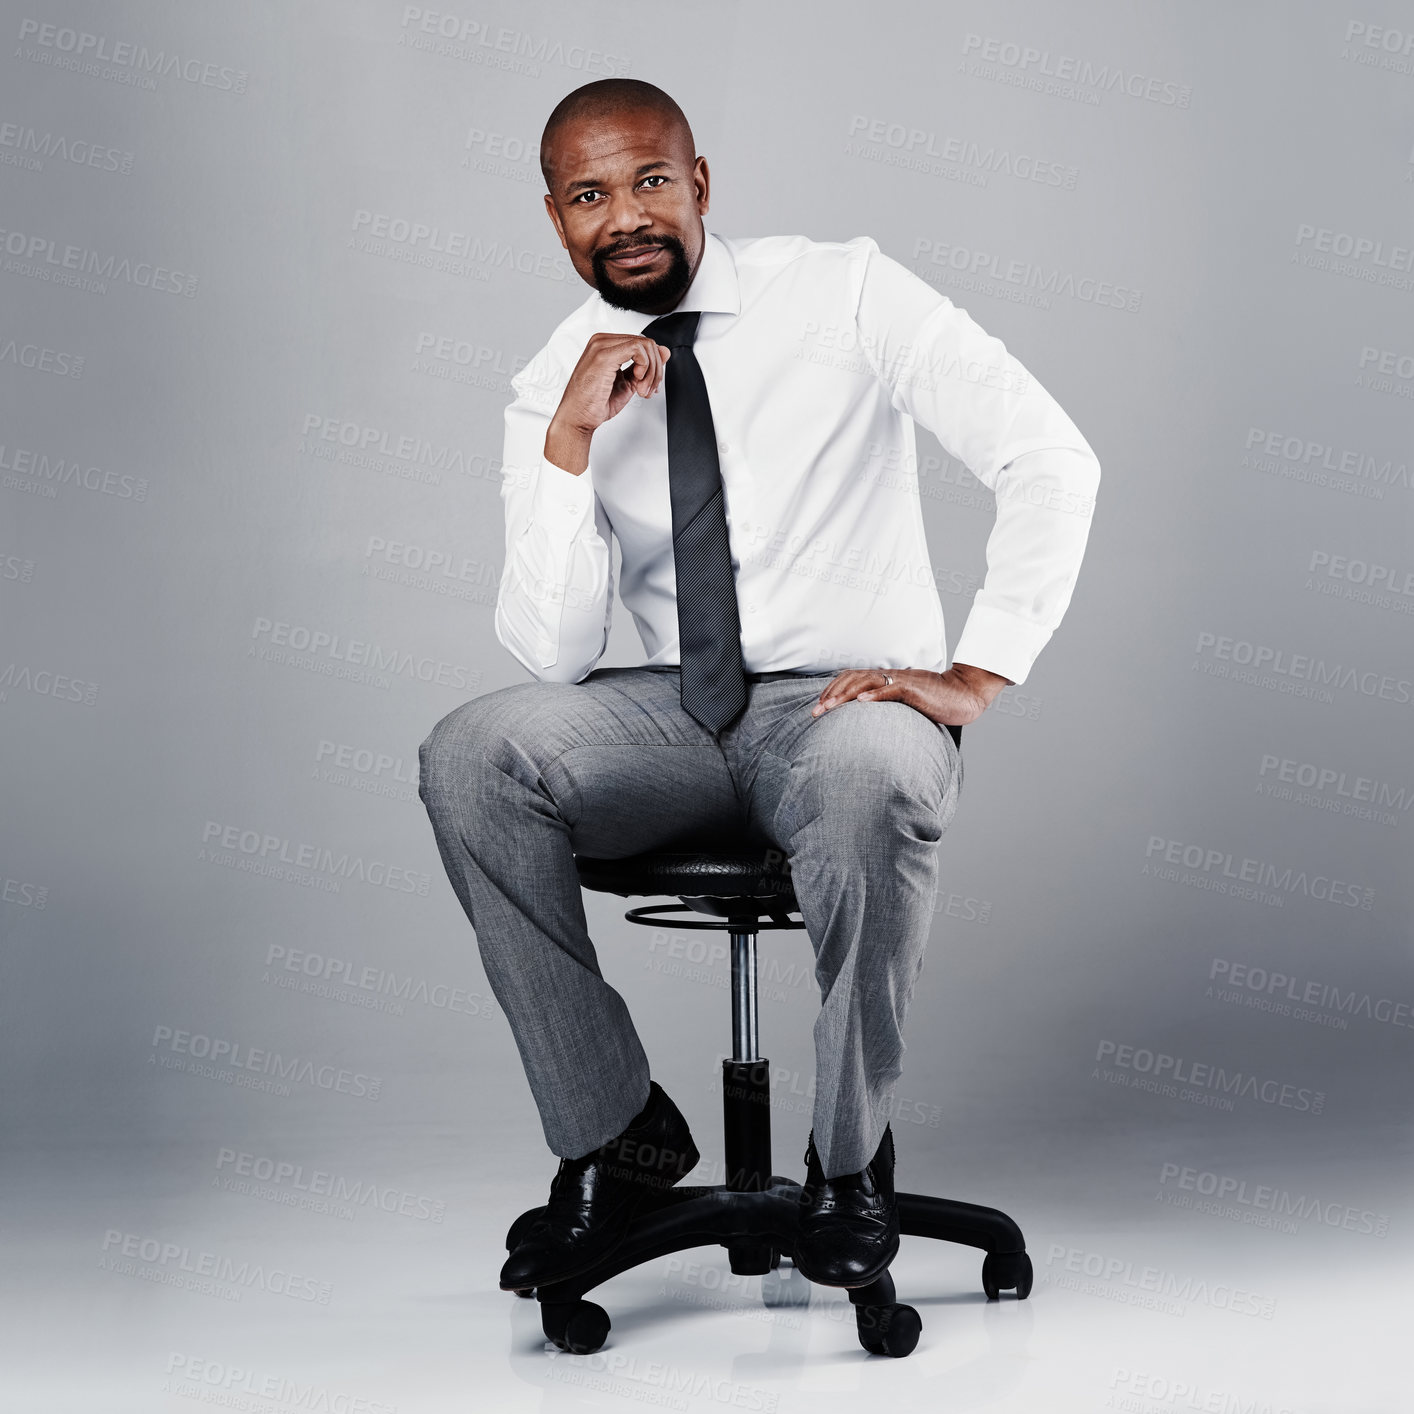 Buy stock photo Studio portrait of a corporate businessman sitting on a chair against a grey background